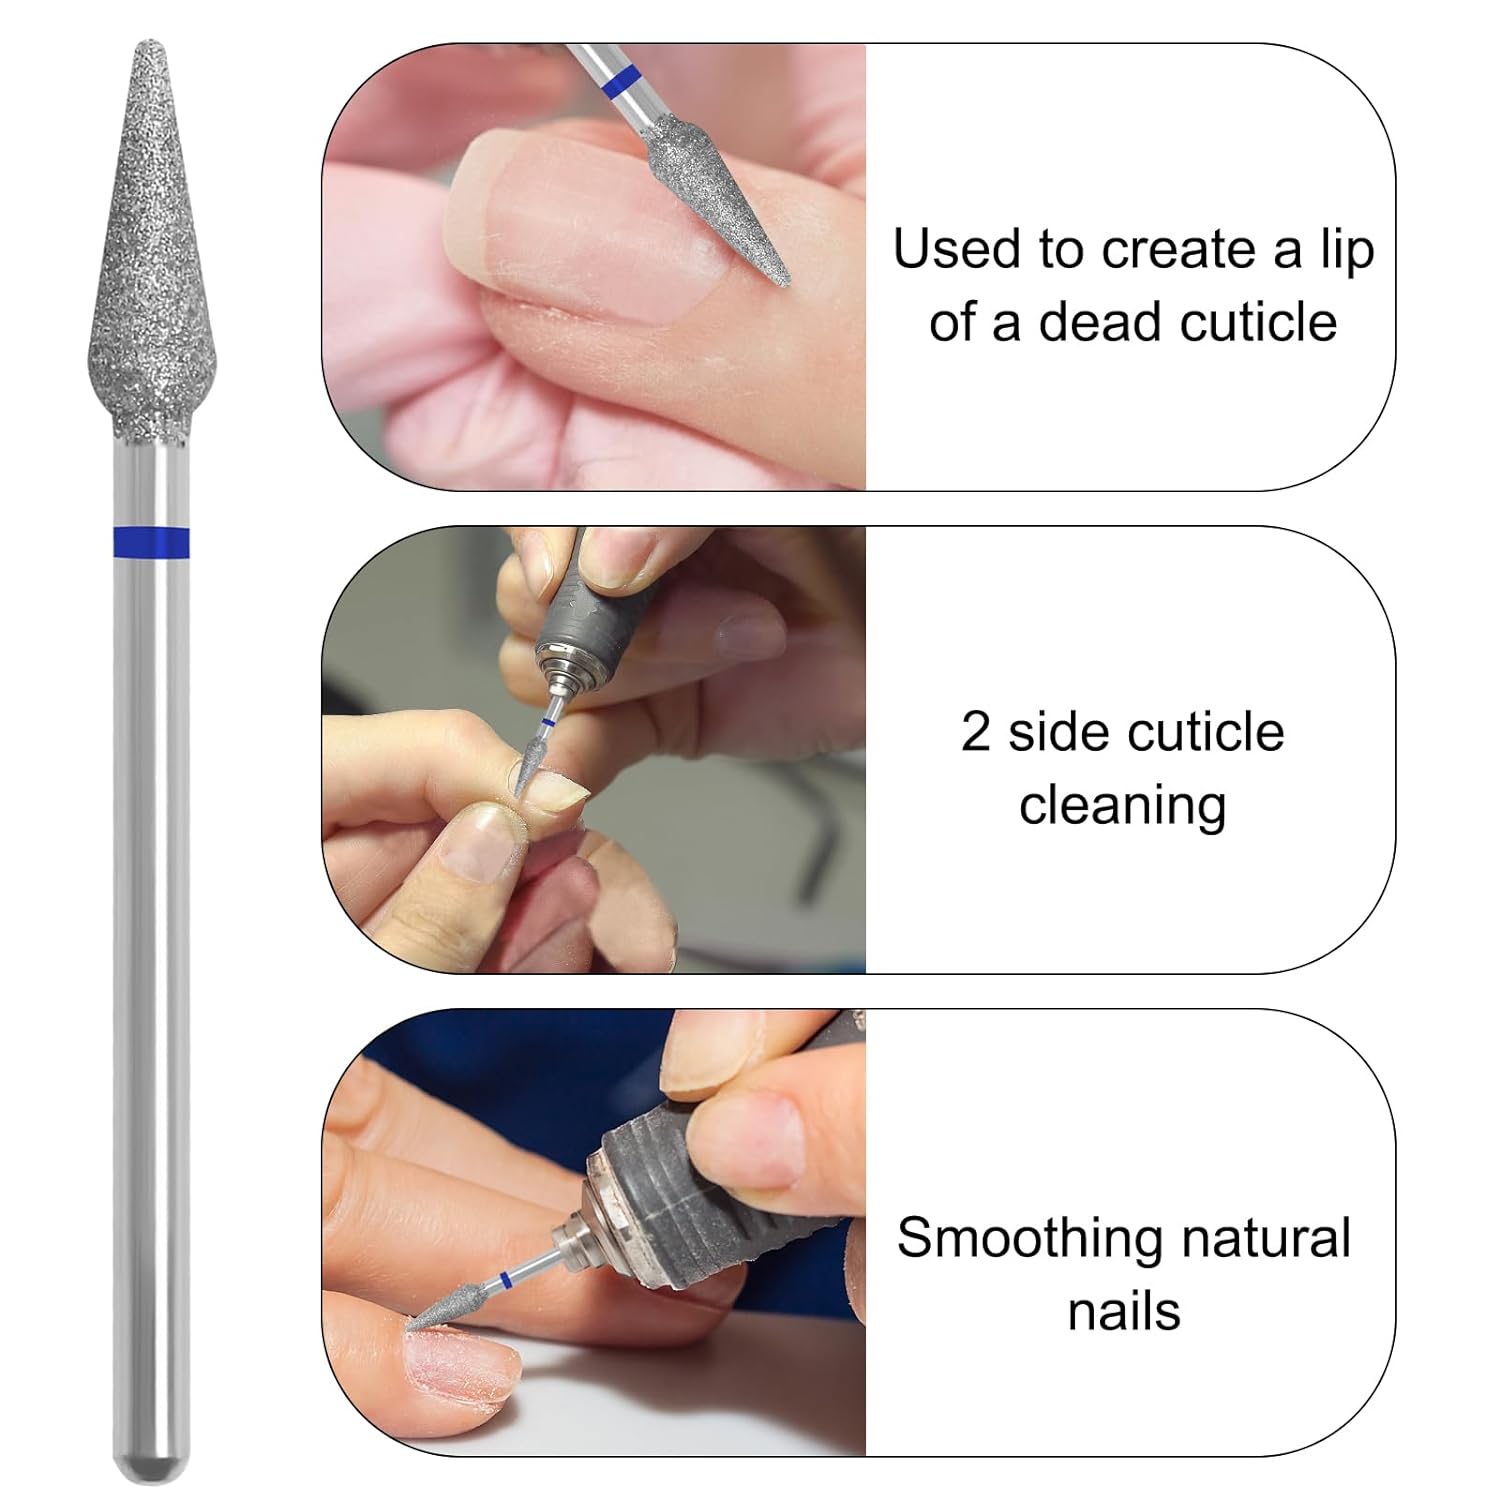 Hardware Bit (Diamond Safety Bits Small Tapered Electric Nail Drill File Cuticle Cleaner Tool for Acrylic Nails Rotary Nail Drill Machine Manicure Pedicure Polishing )